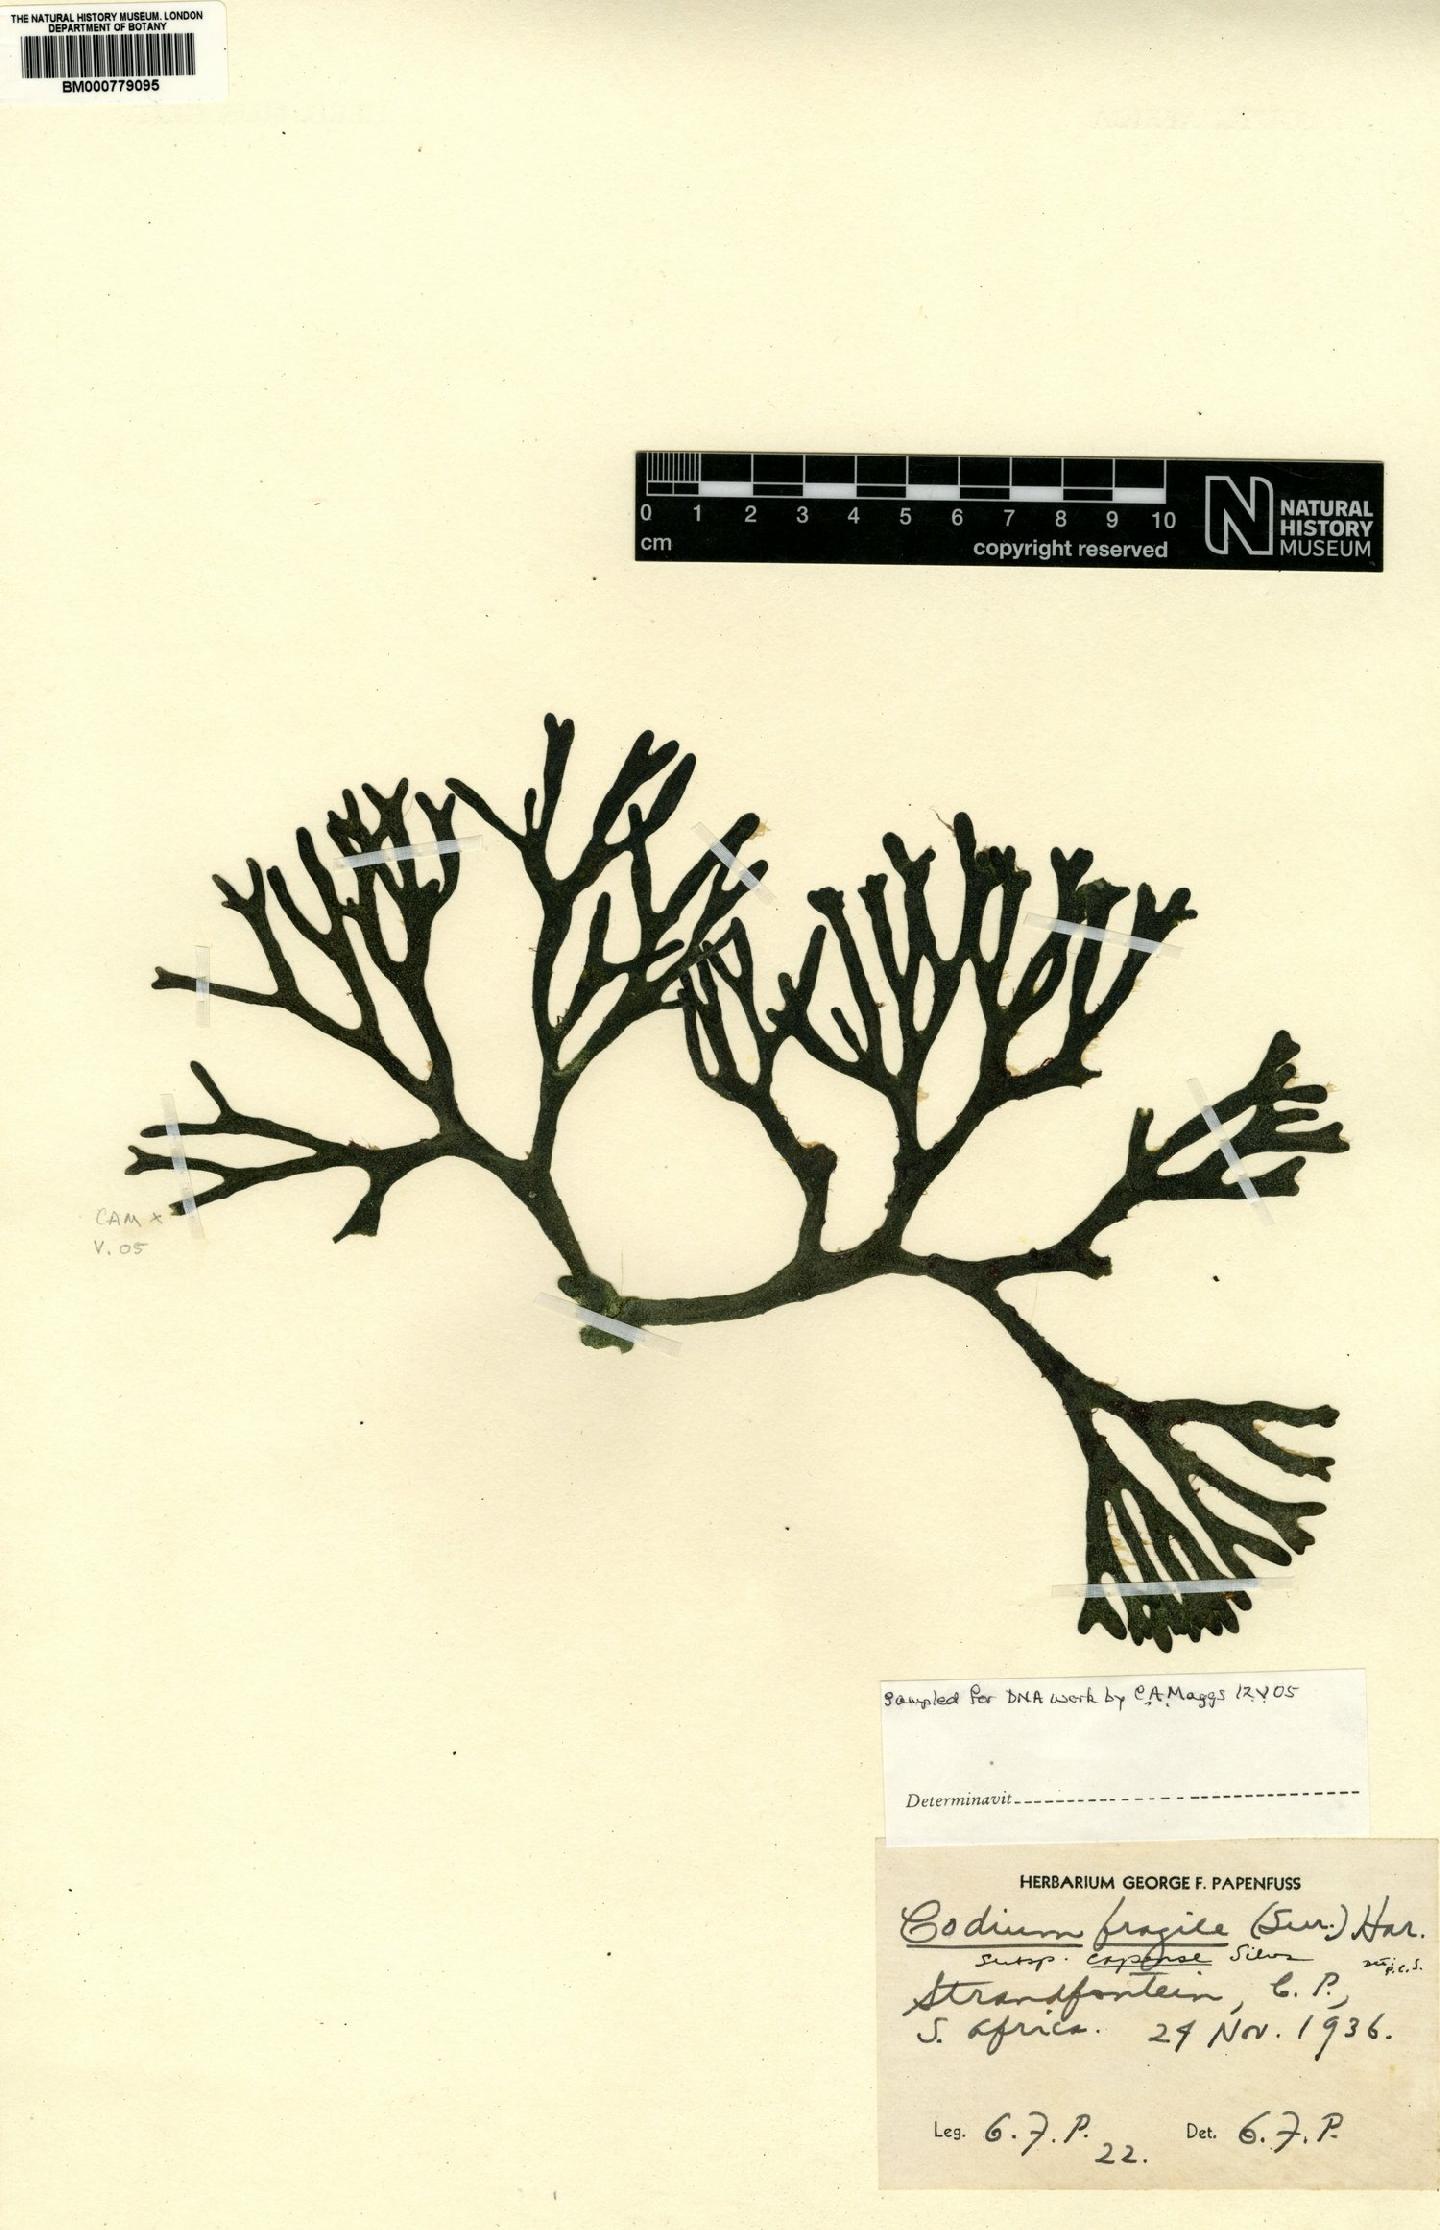 To NHMUK collection (Codium fragile subsp. papenfussii Maggs; Holotype; NHMUK:ecatalogue:7981010)